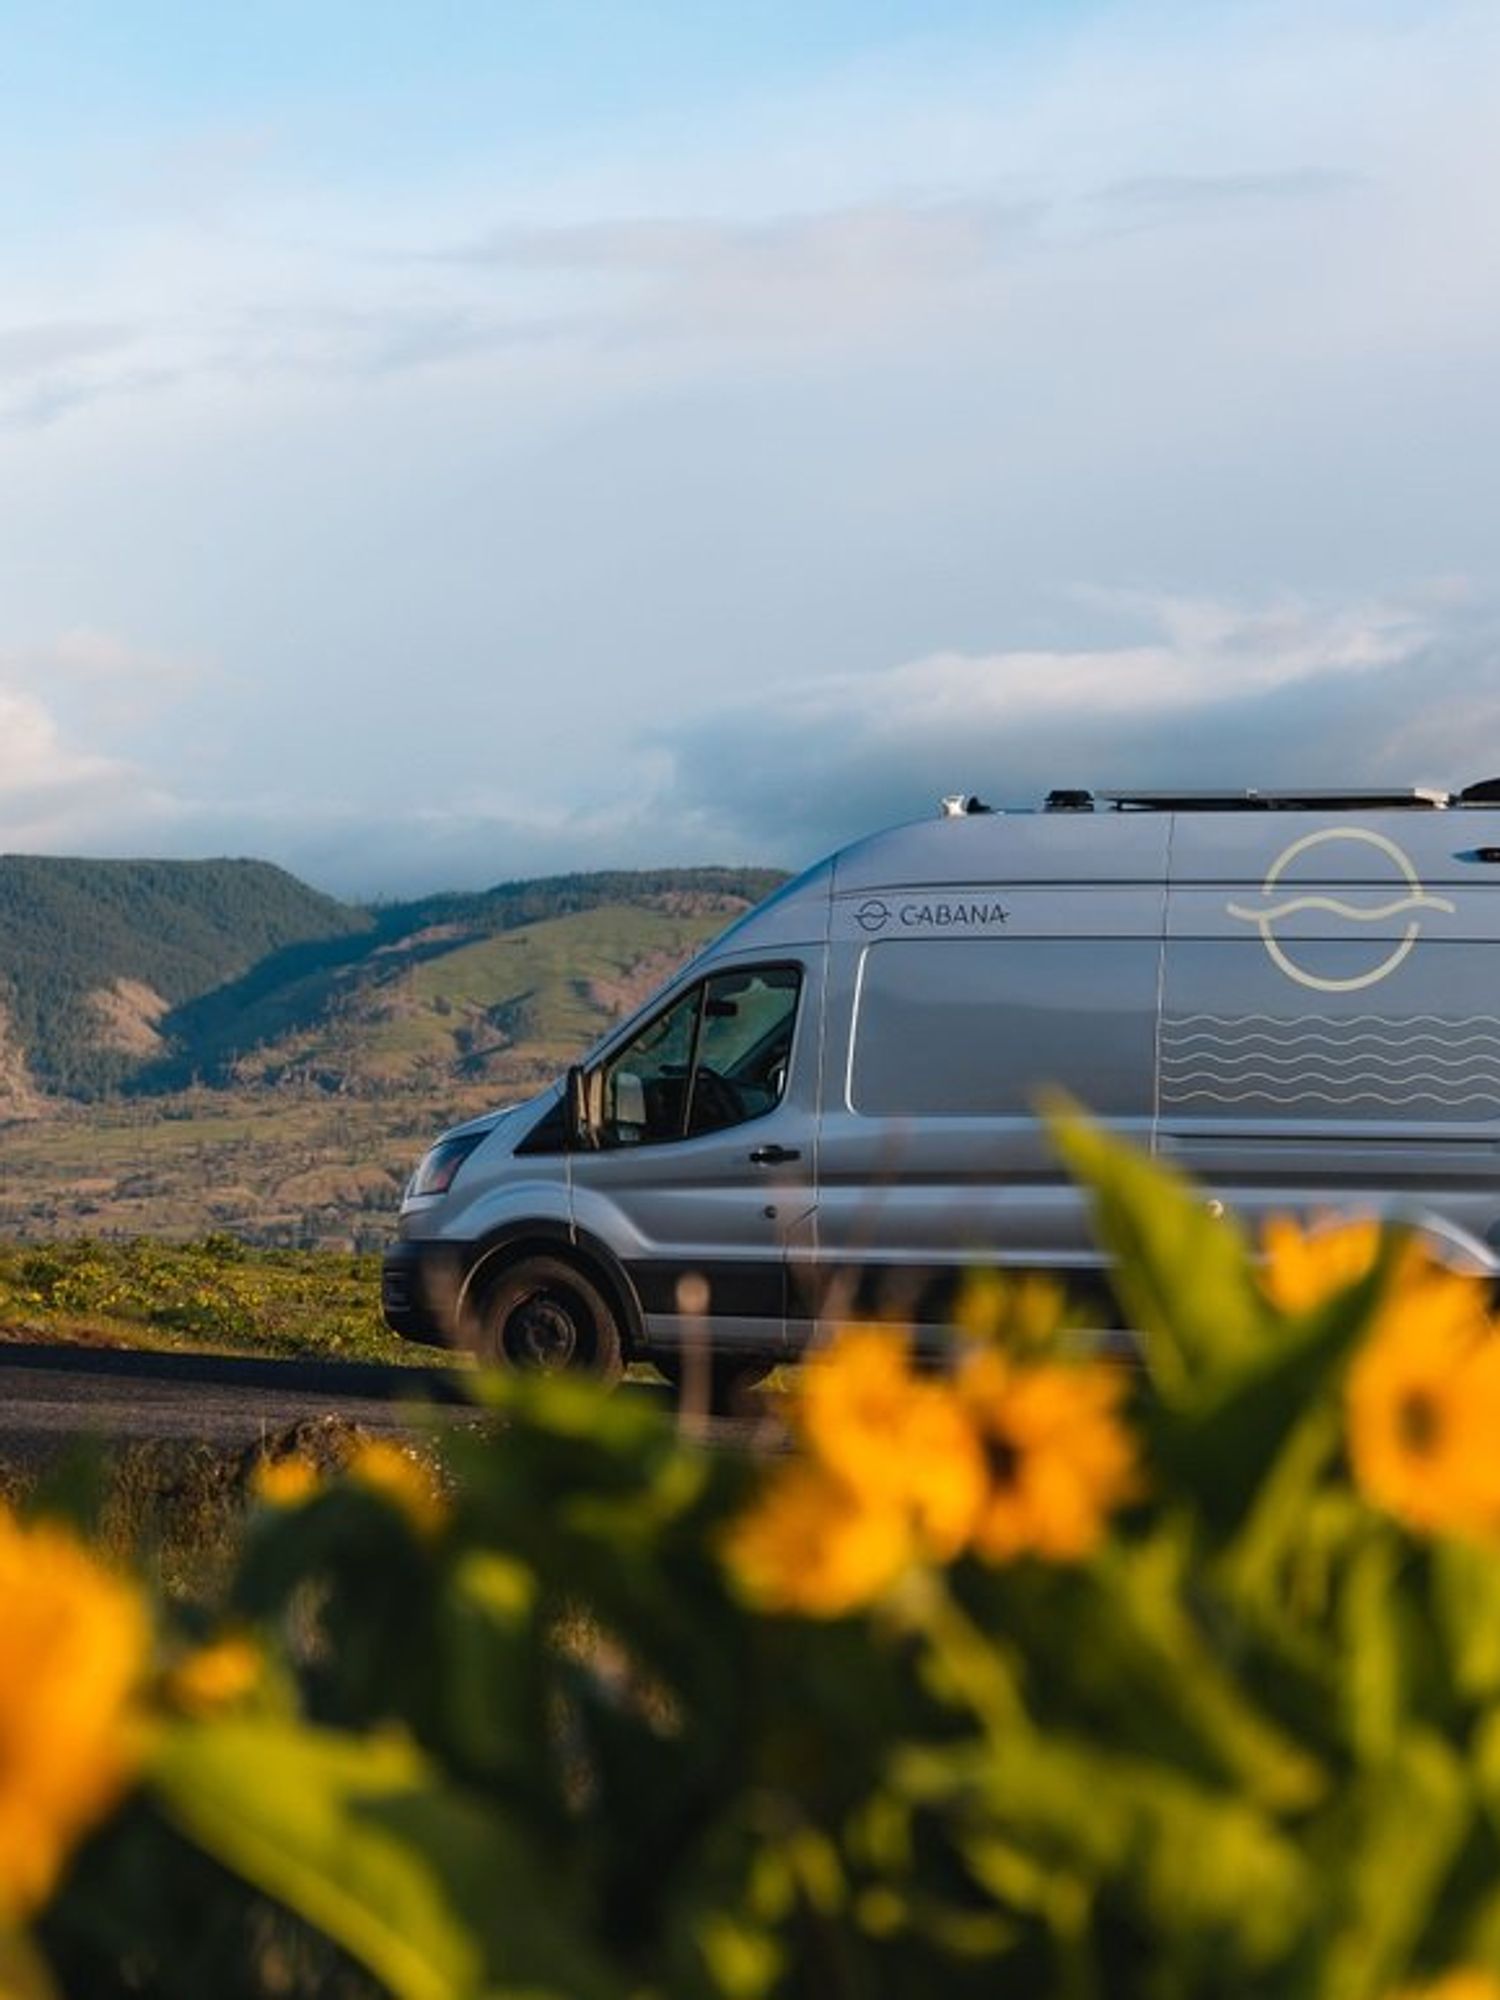 Cabana SF camper rentals offers a taste of #vanlife without the commitment